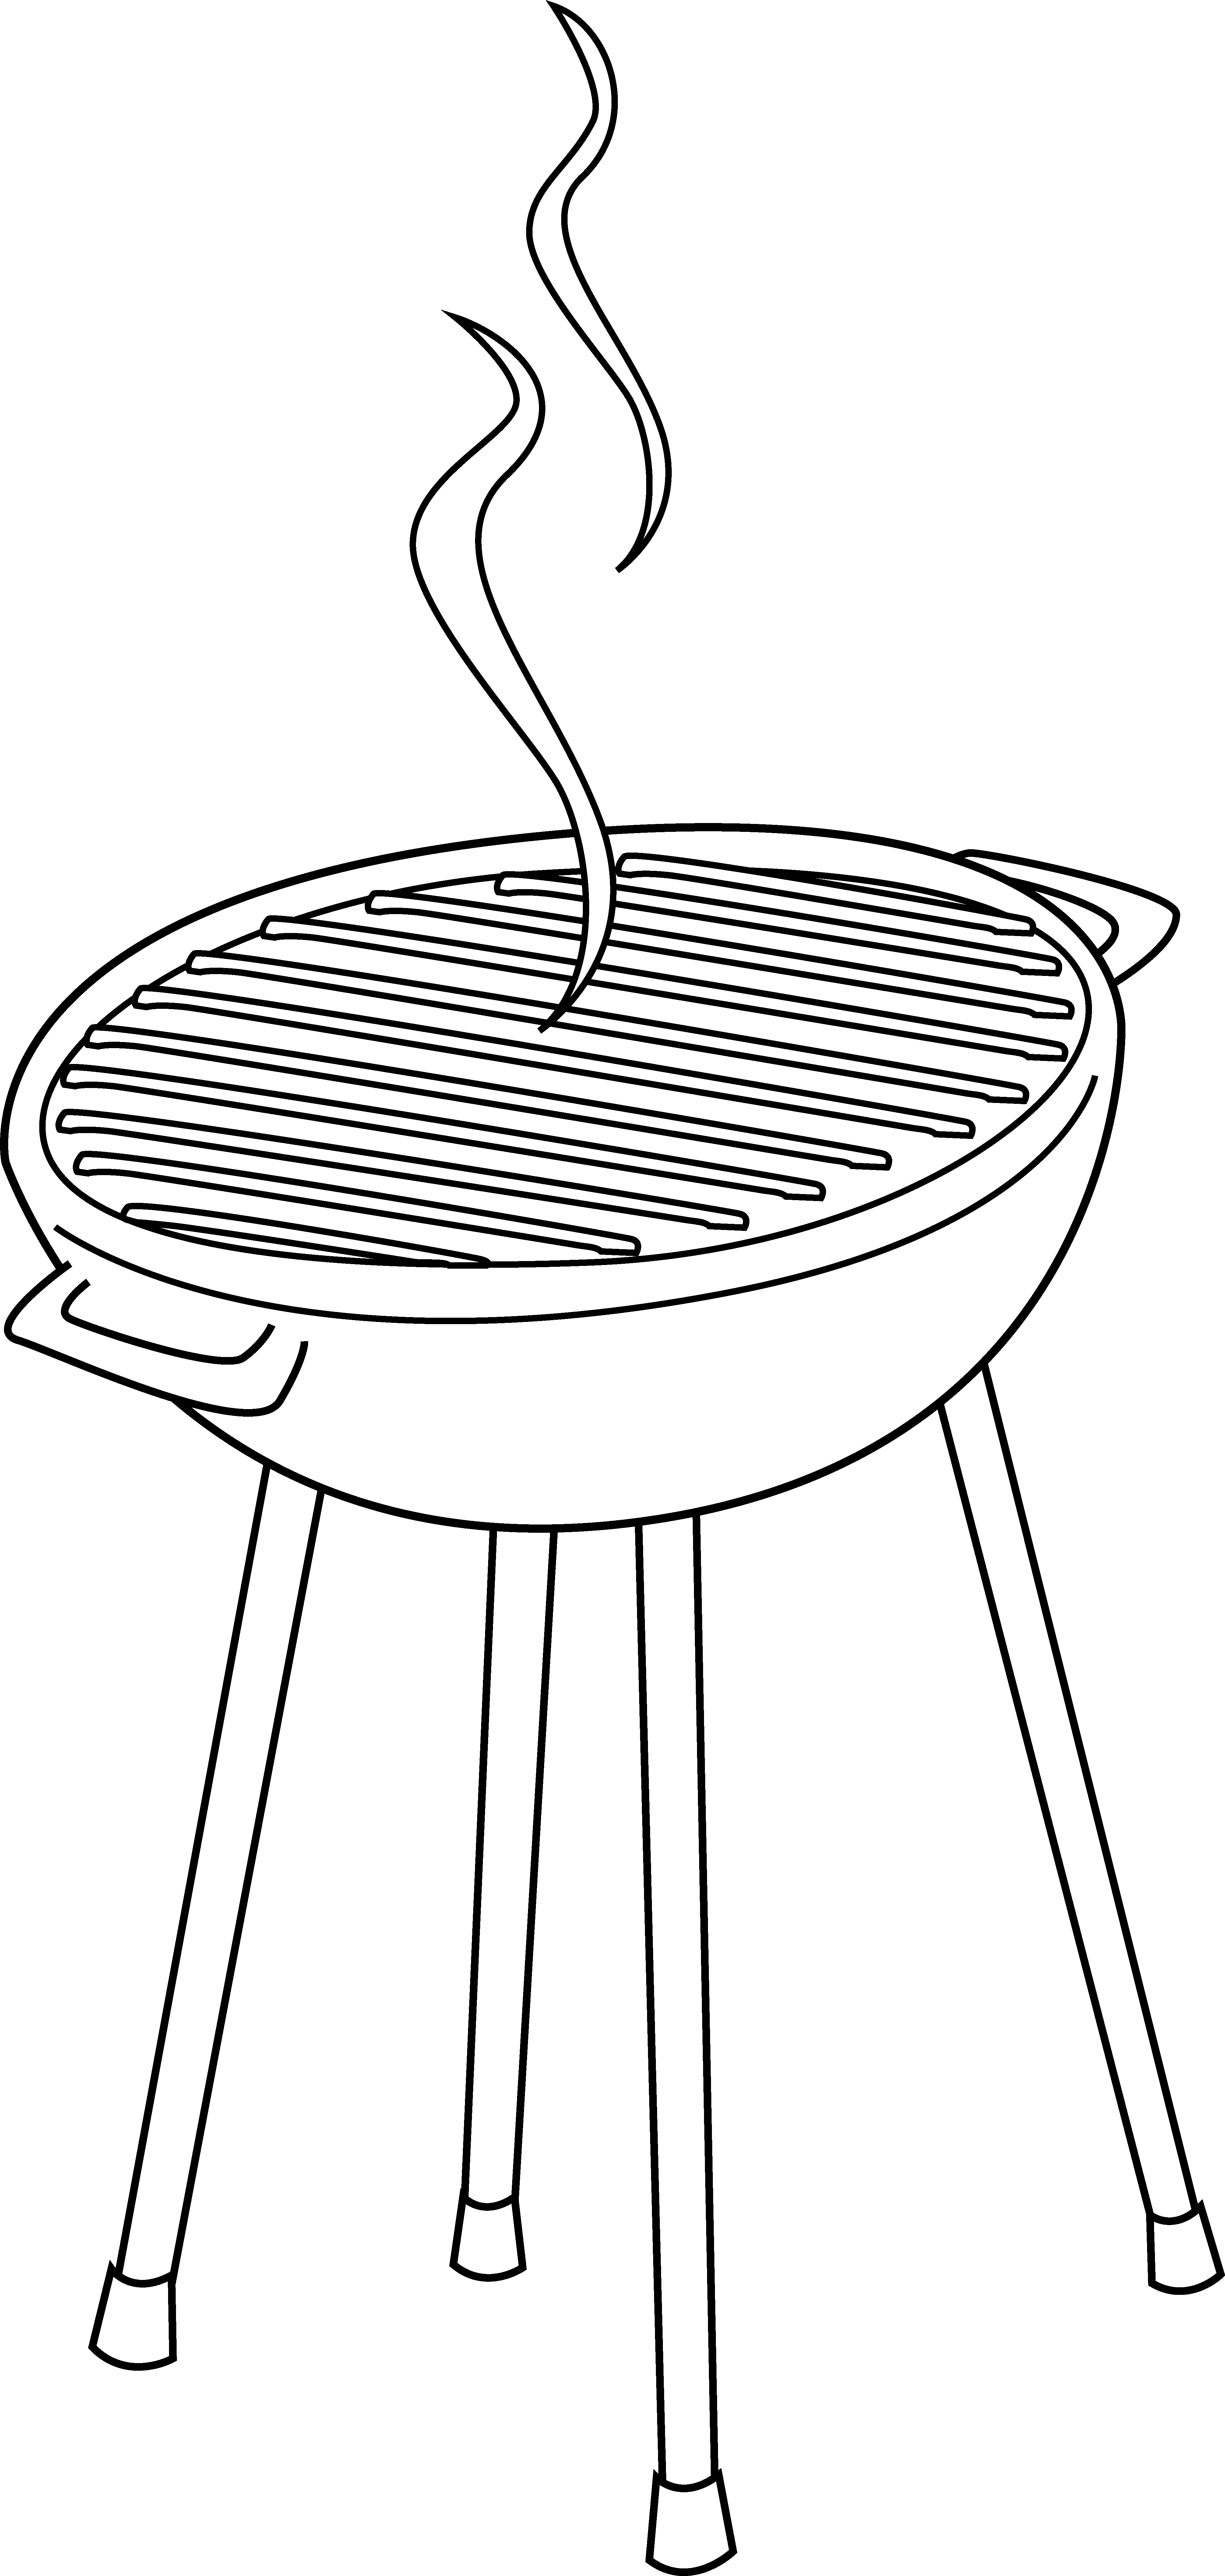  collection of bbq. Grill clipart vintage